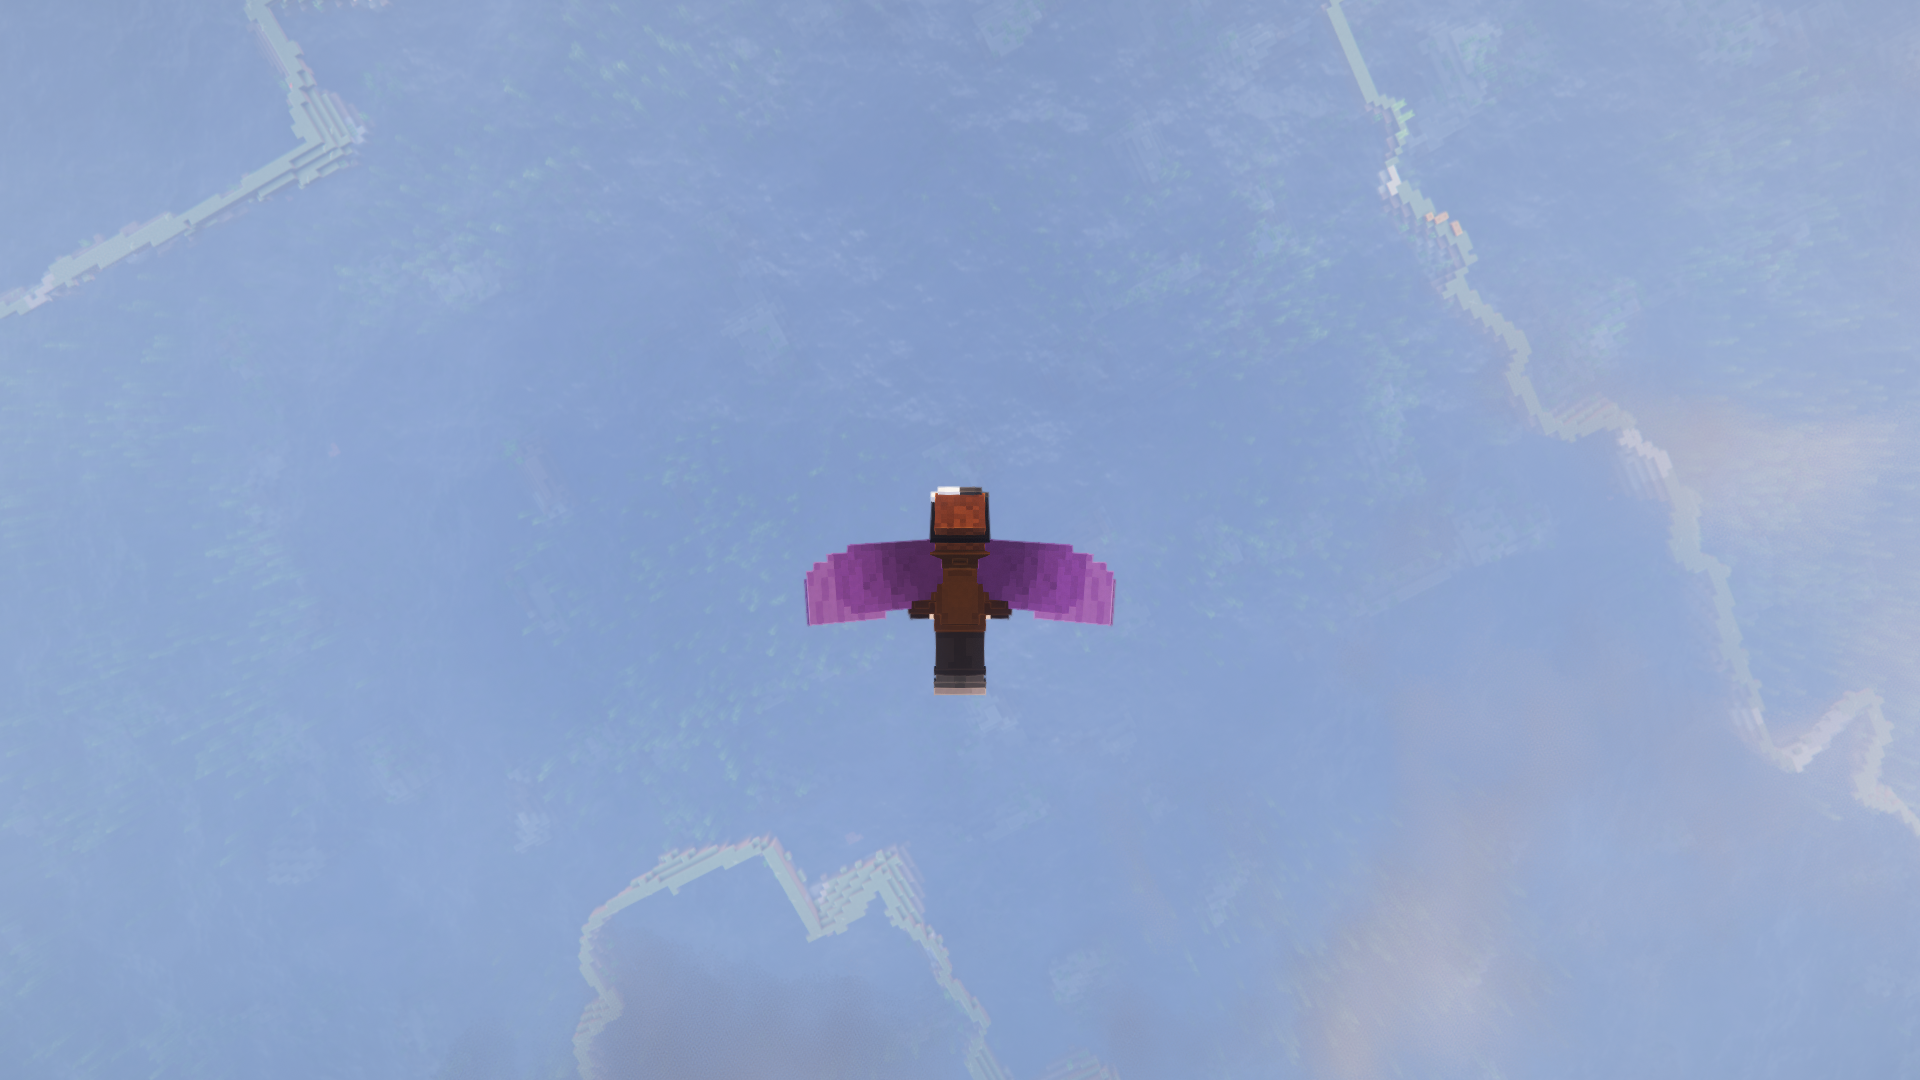 Just flying over some sky oceans